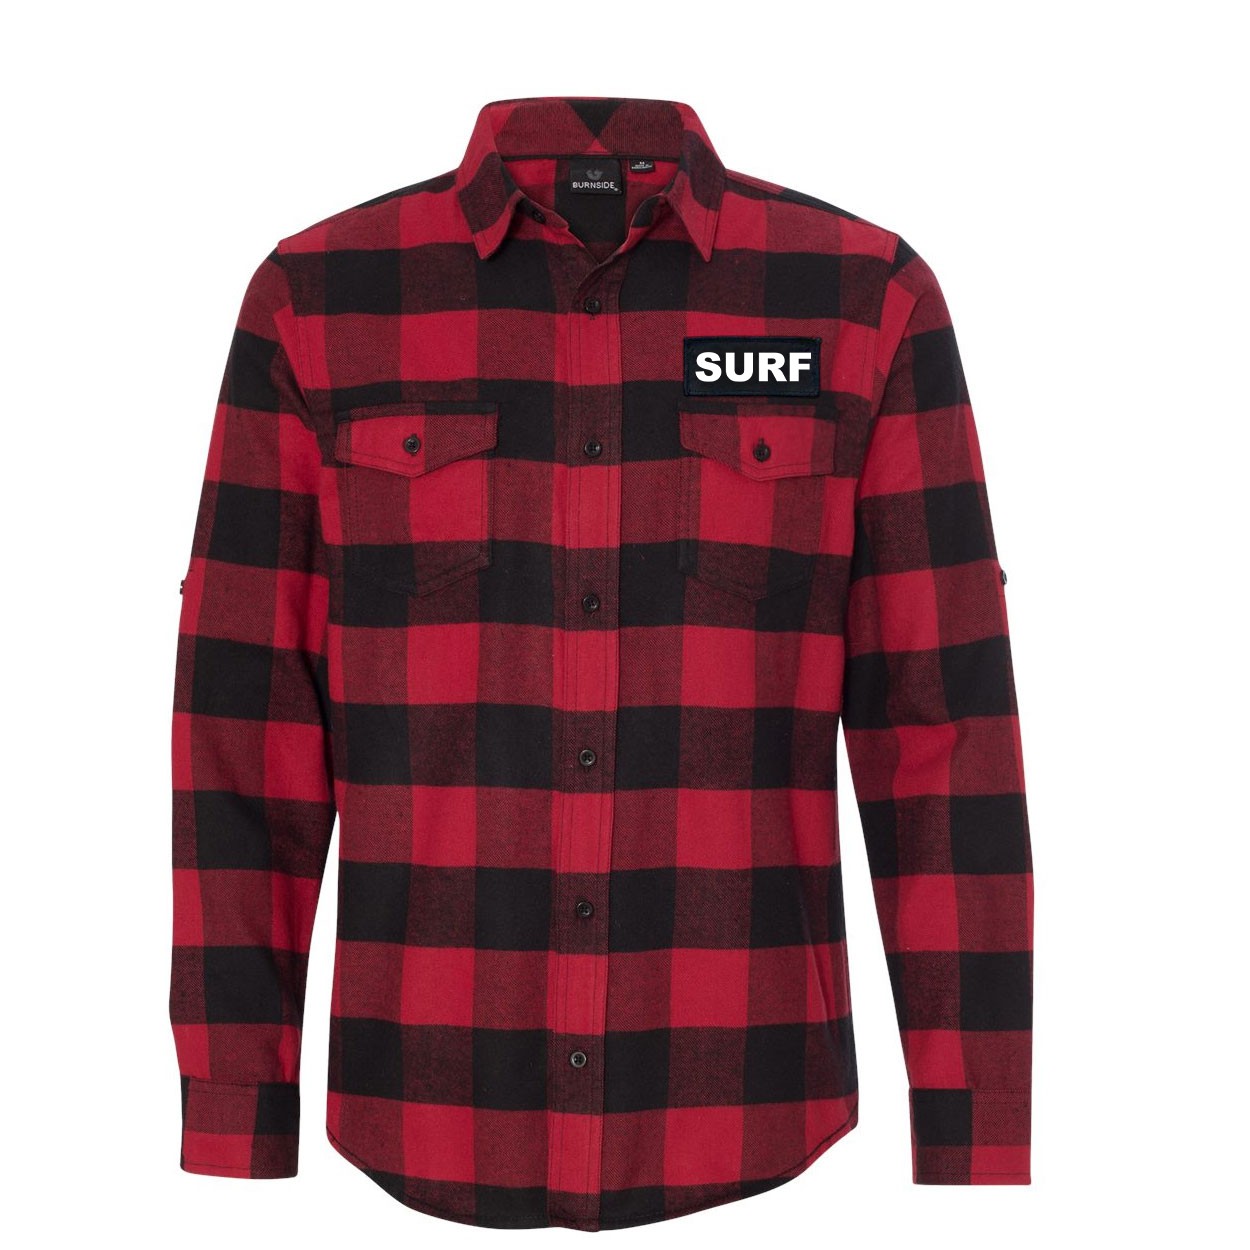 Surf Brand Logo Classic Unisex Long Sleeve Woven Patch Flannel Shirt Red/Black Buffalo (White Logo)